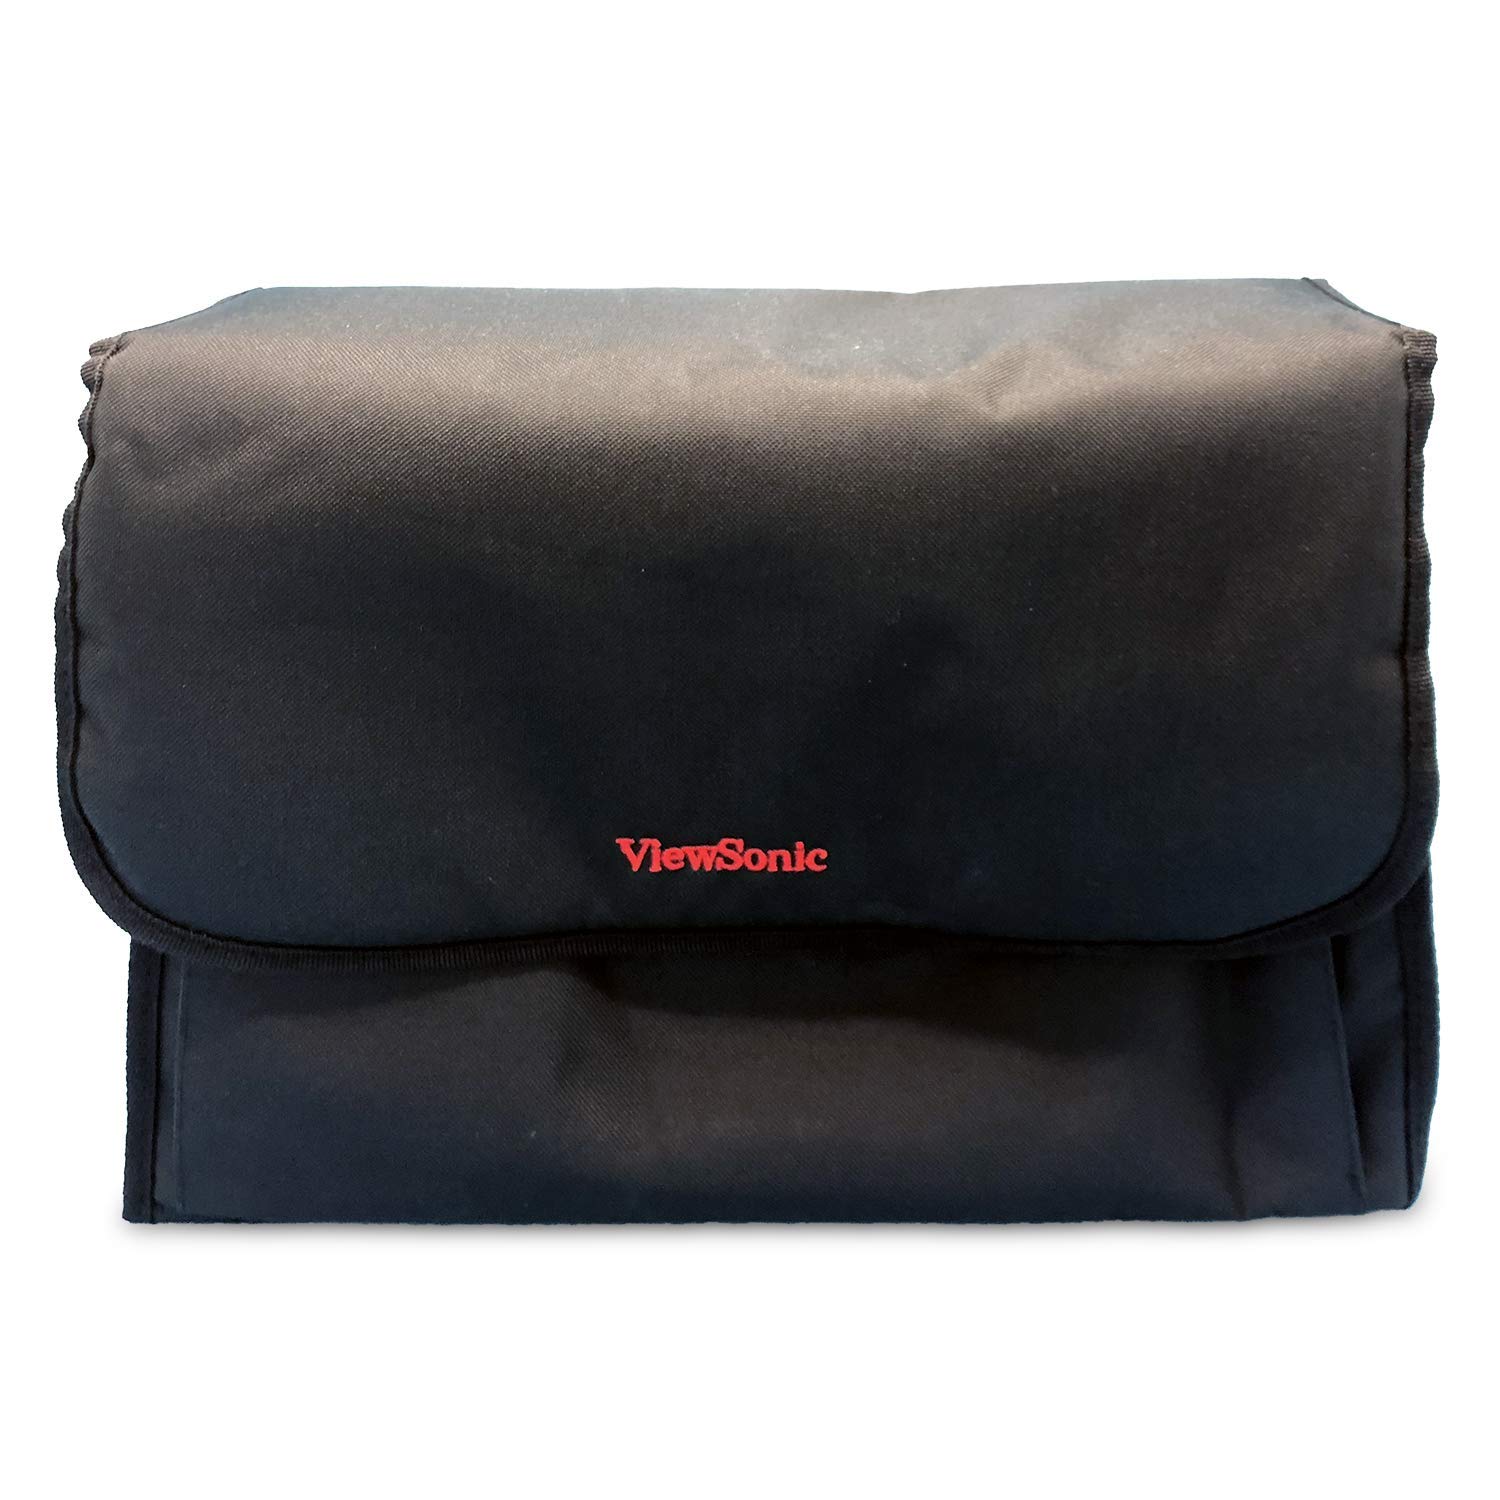 ViewSonic PJ-CASE-011 Zipped Soft Padded Carrying Case for ViewSonic Projectors Large